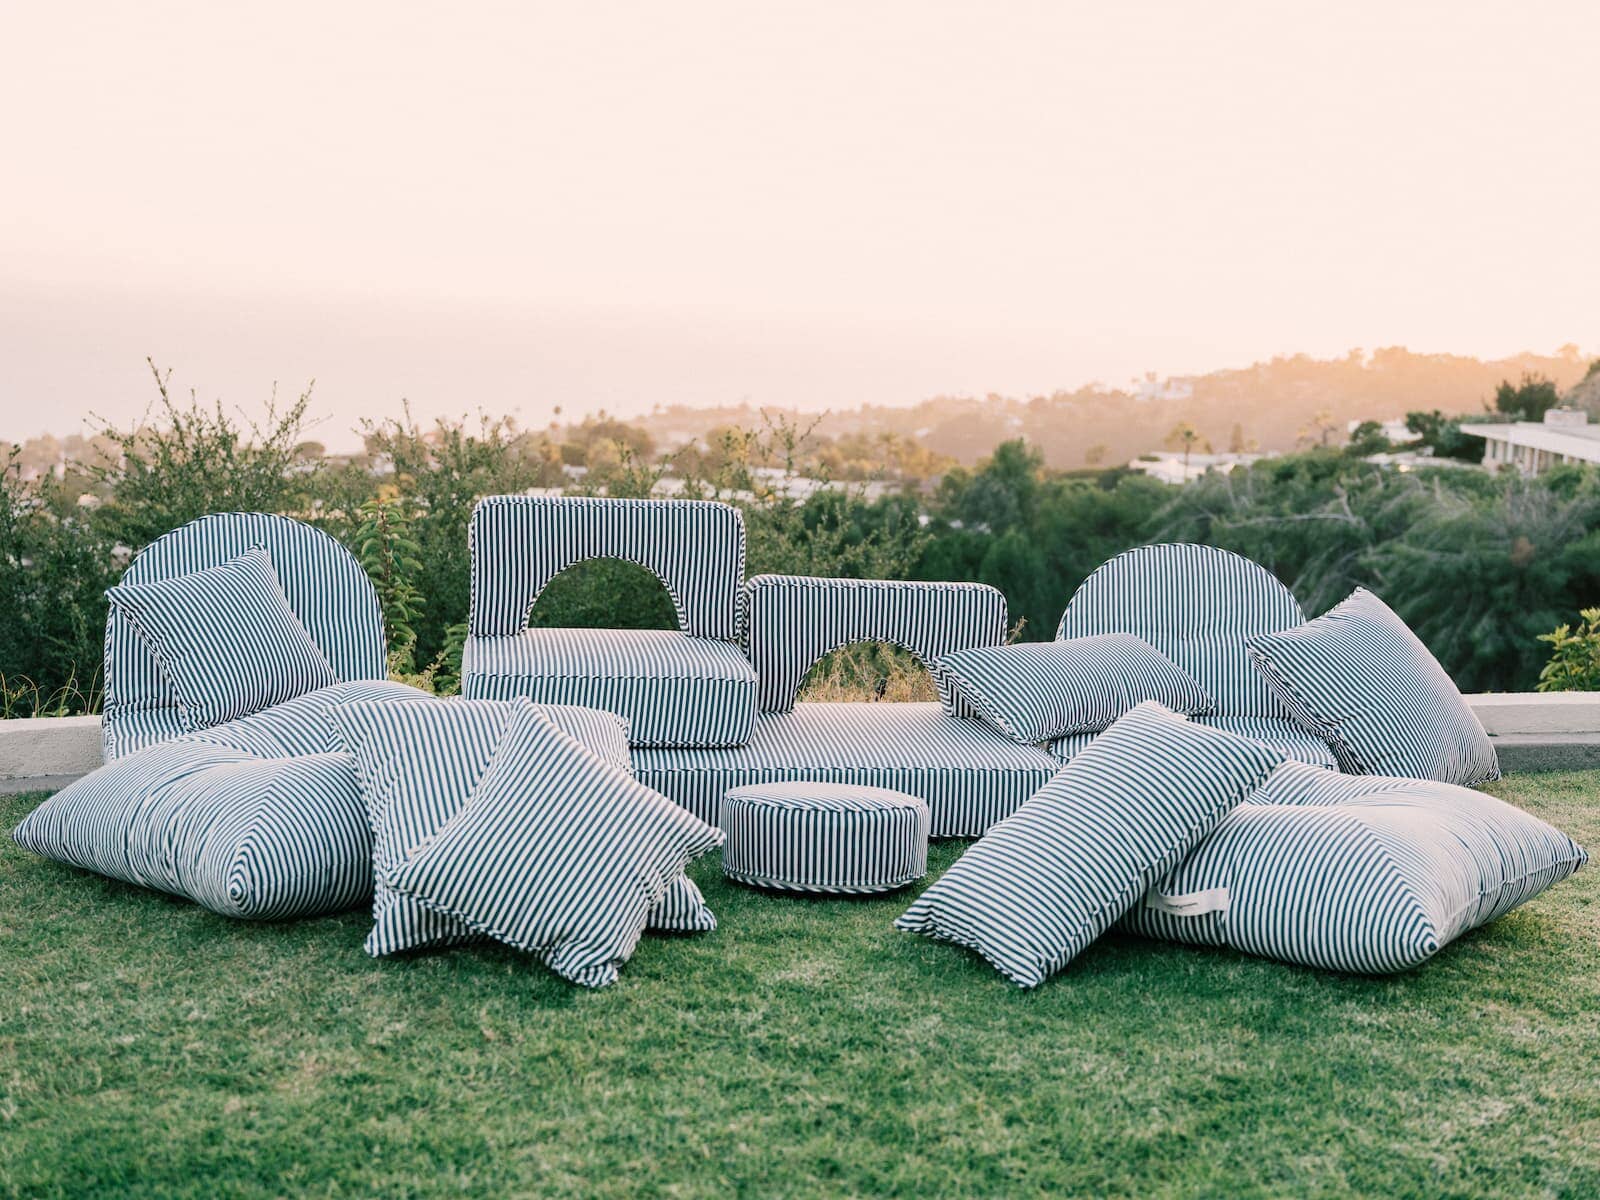 Outdoor image of the entire outdoor cushion collection on the grass